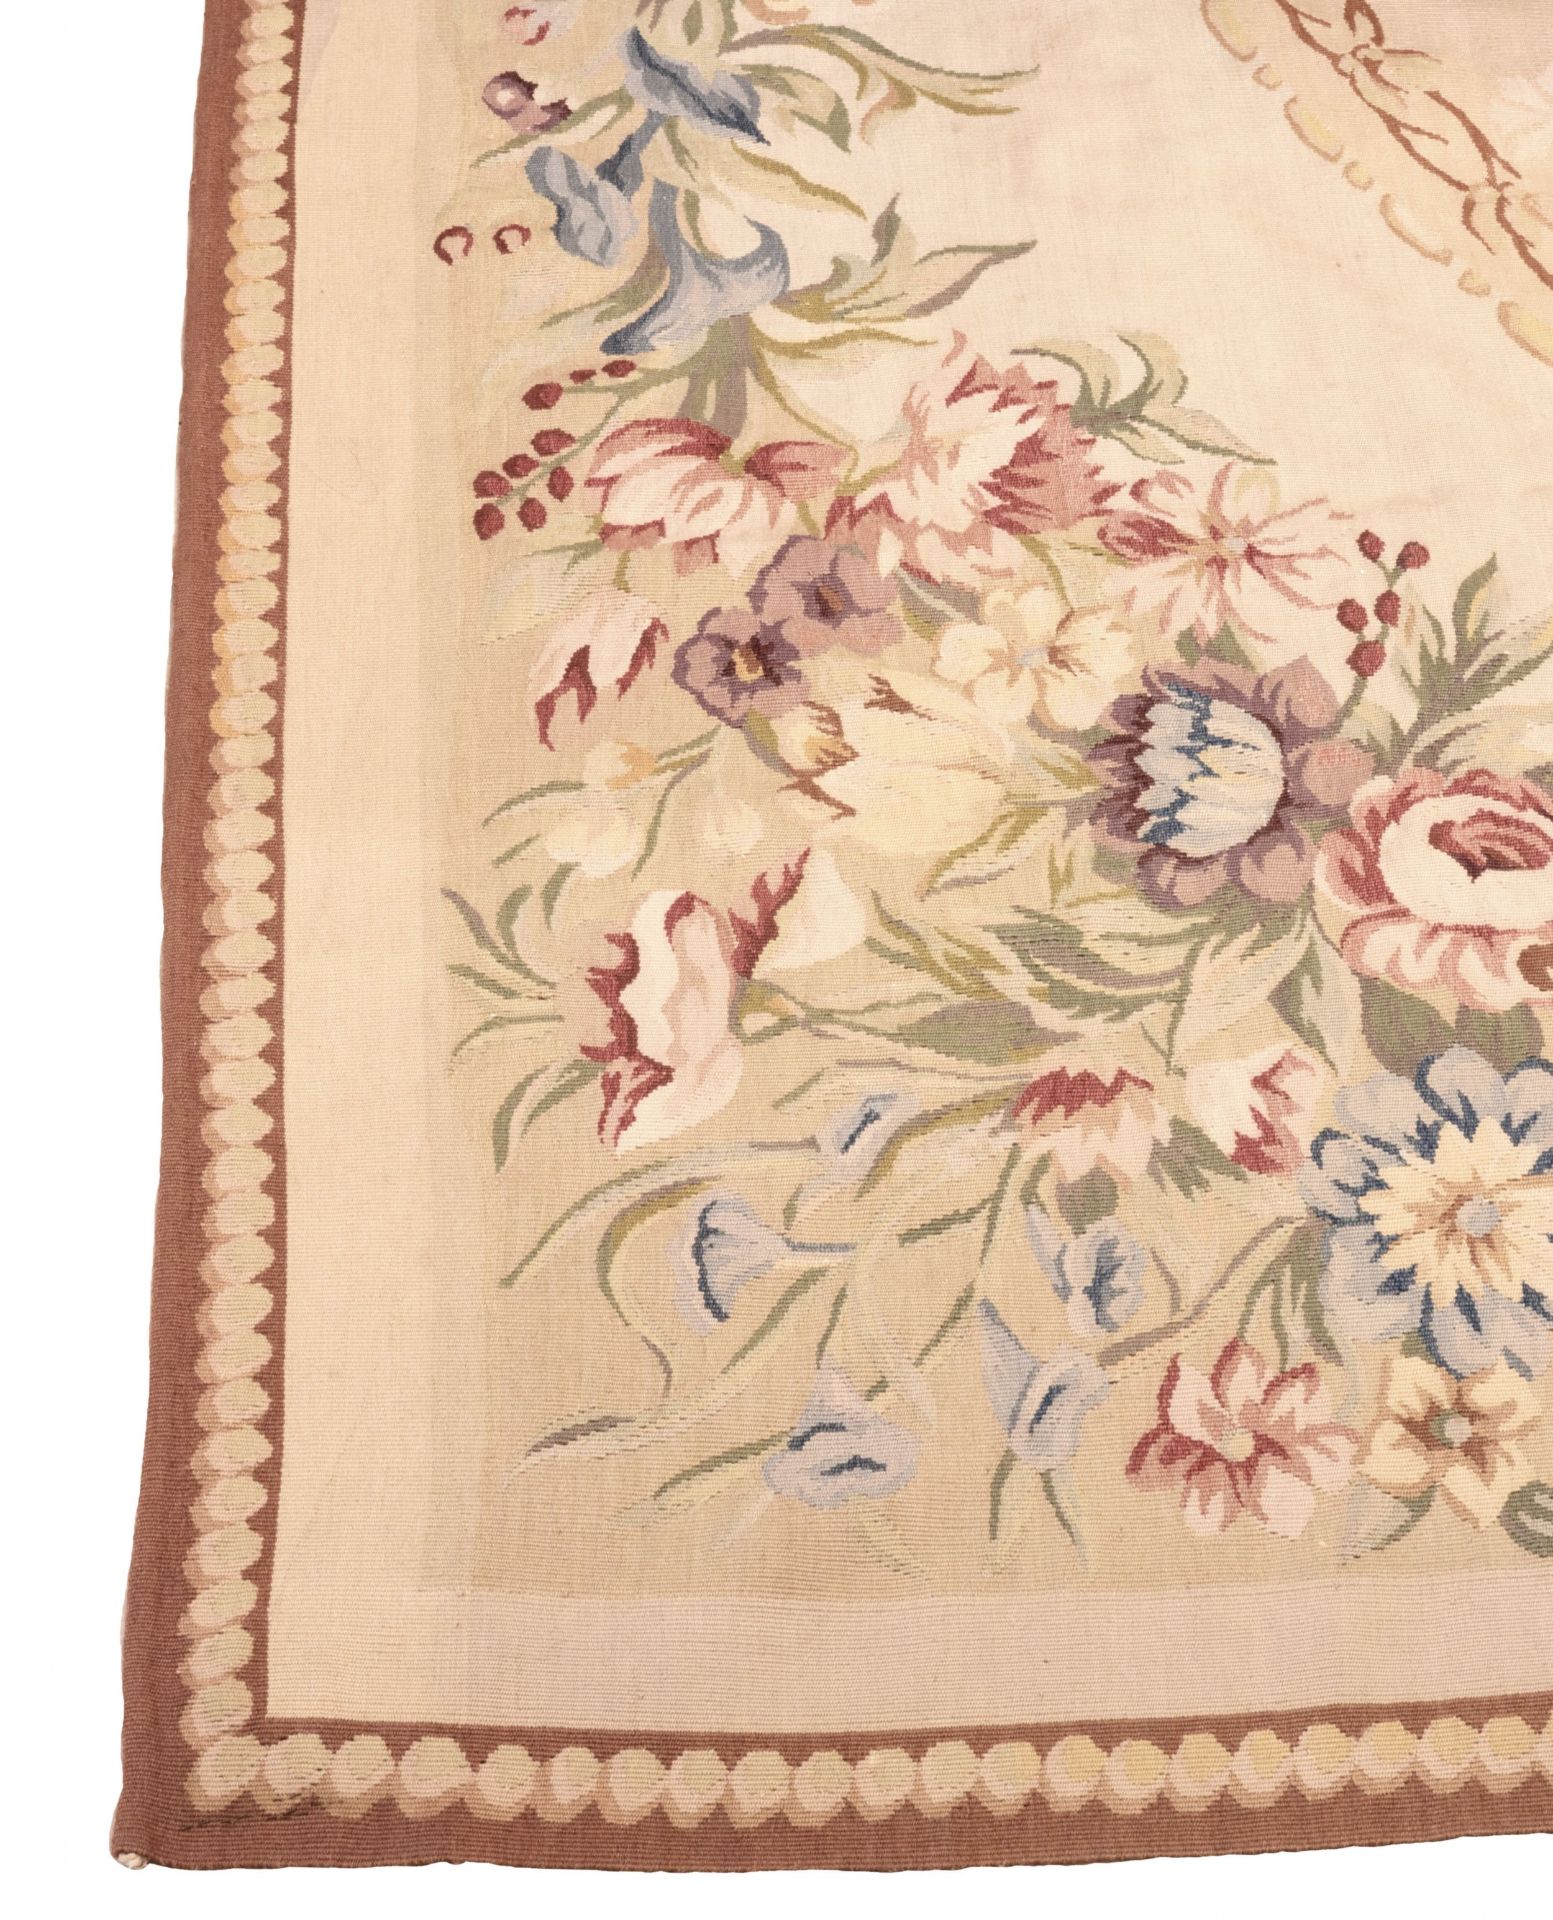 Floral tapestry in Aubusson style. The end of the 19th century. - Image 2 of 4